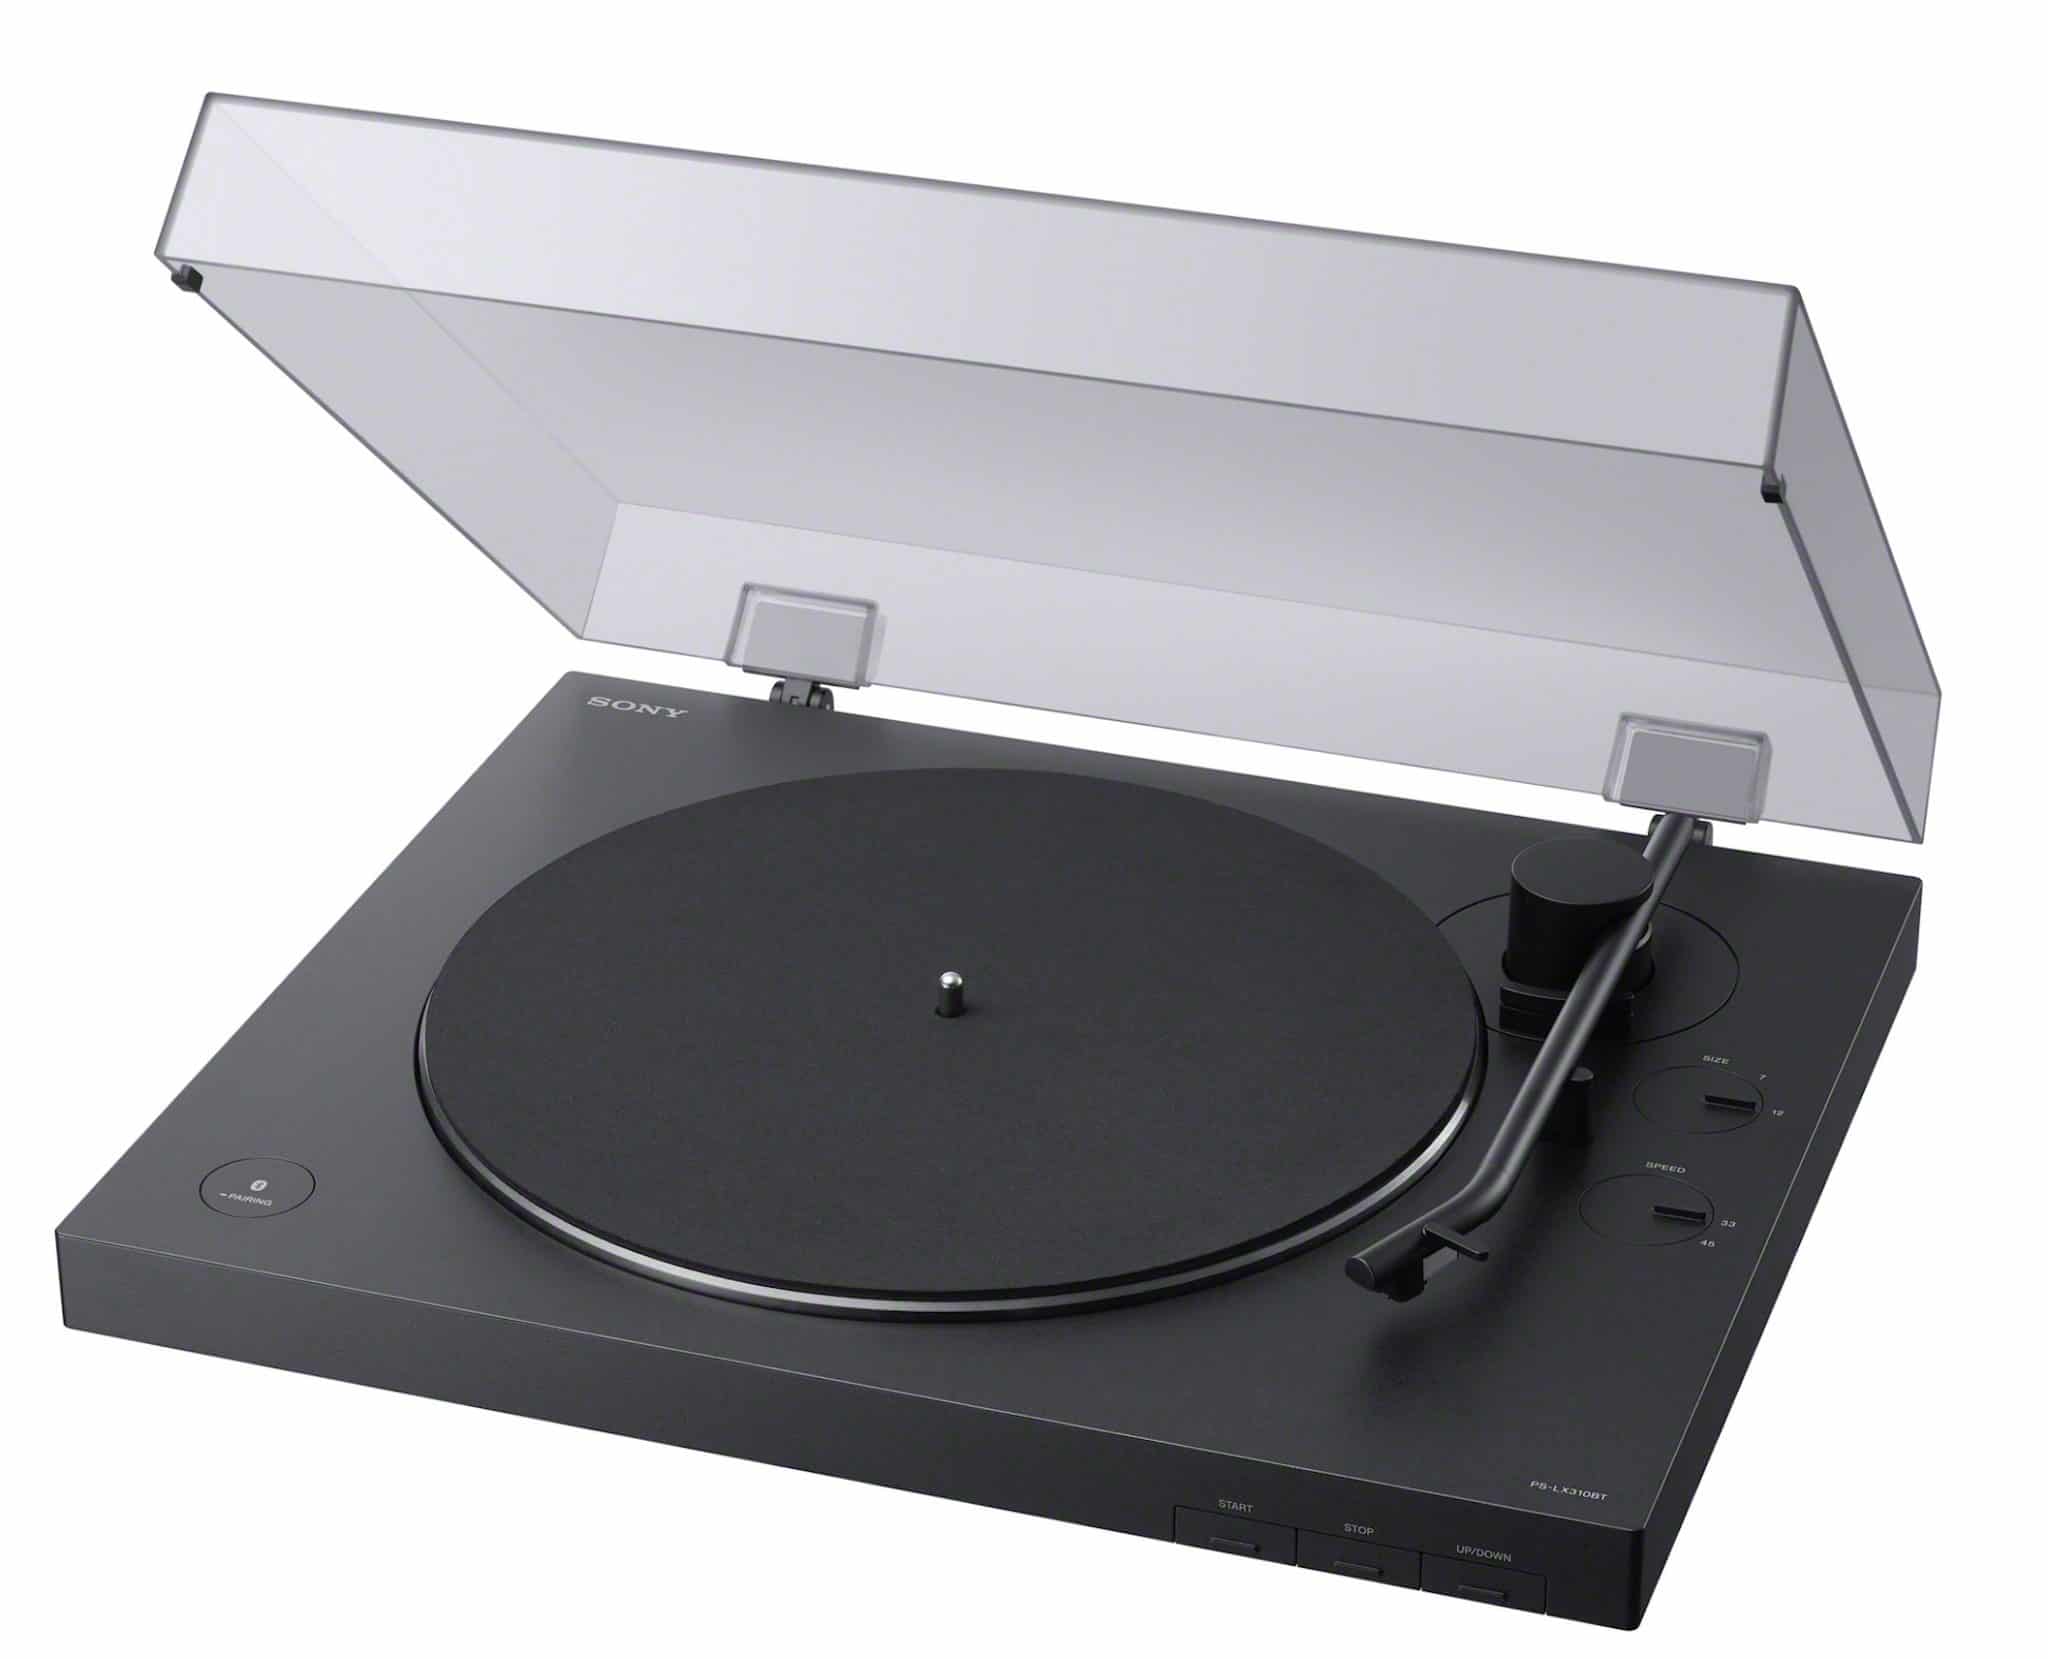 PS-LX310BT turntable From Sony 